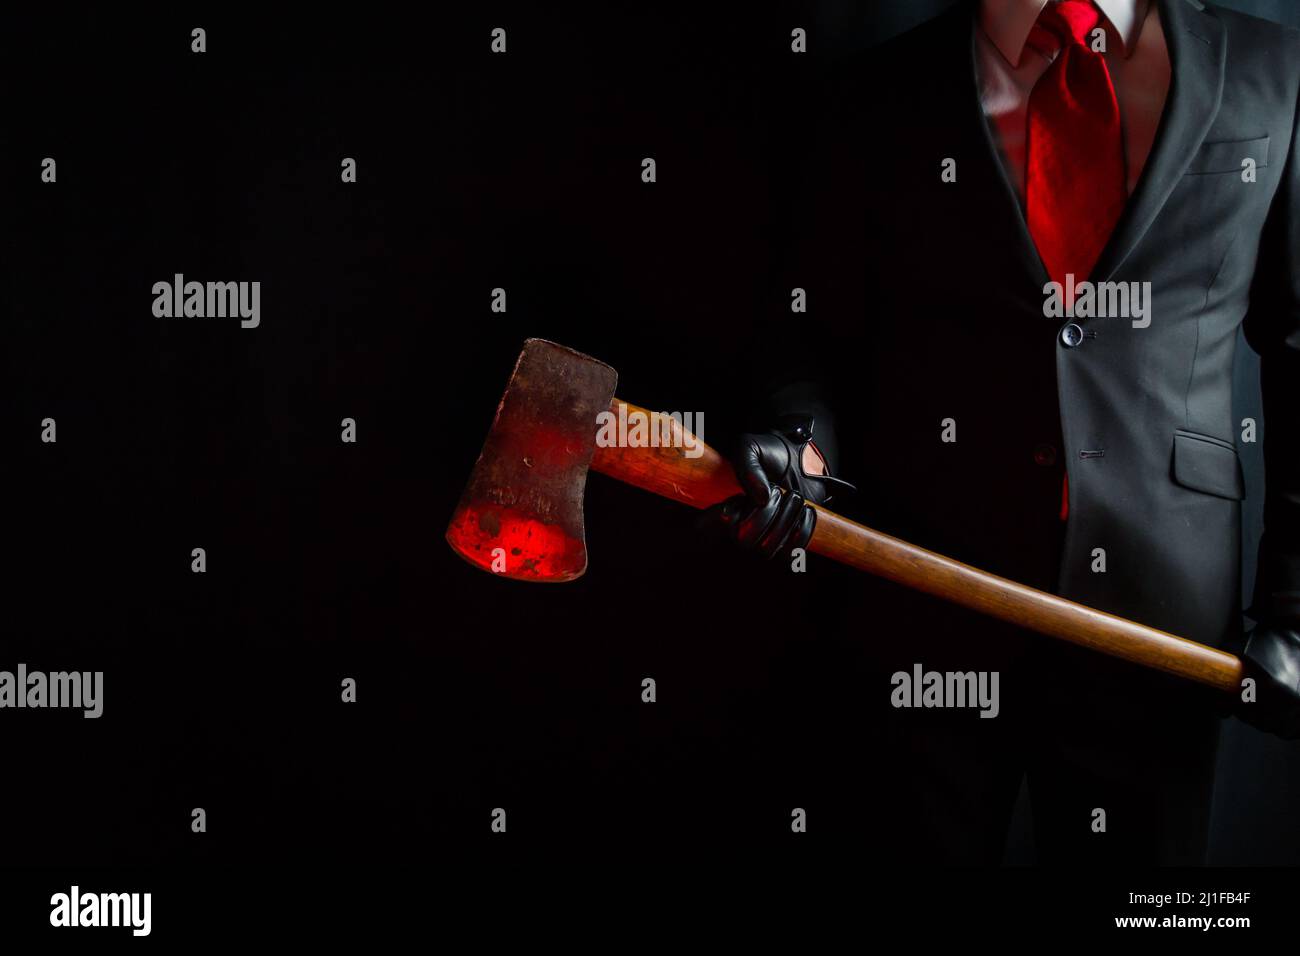 Portrait of Businessman in Dark Suit and Leather Gloves Holding Bloody Red Axe. Concept of Horror Movie Killer. Stock Photo